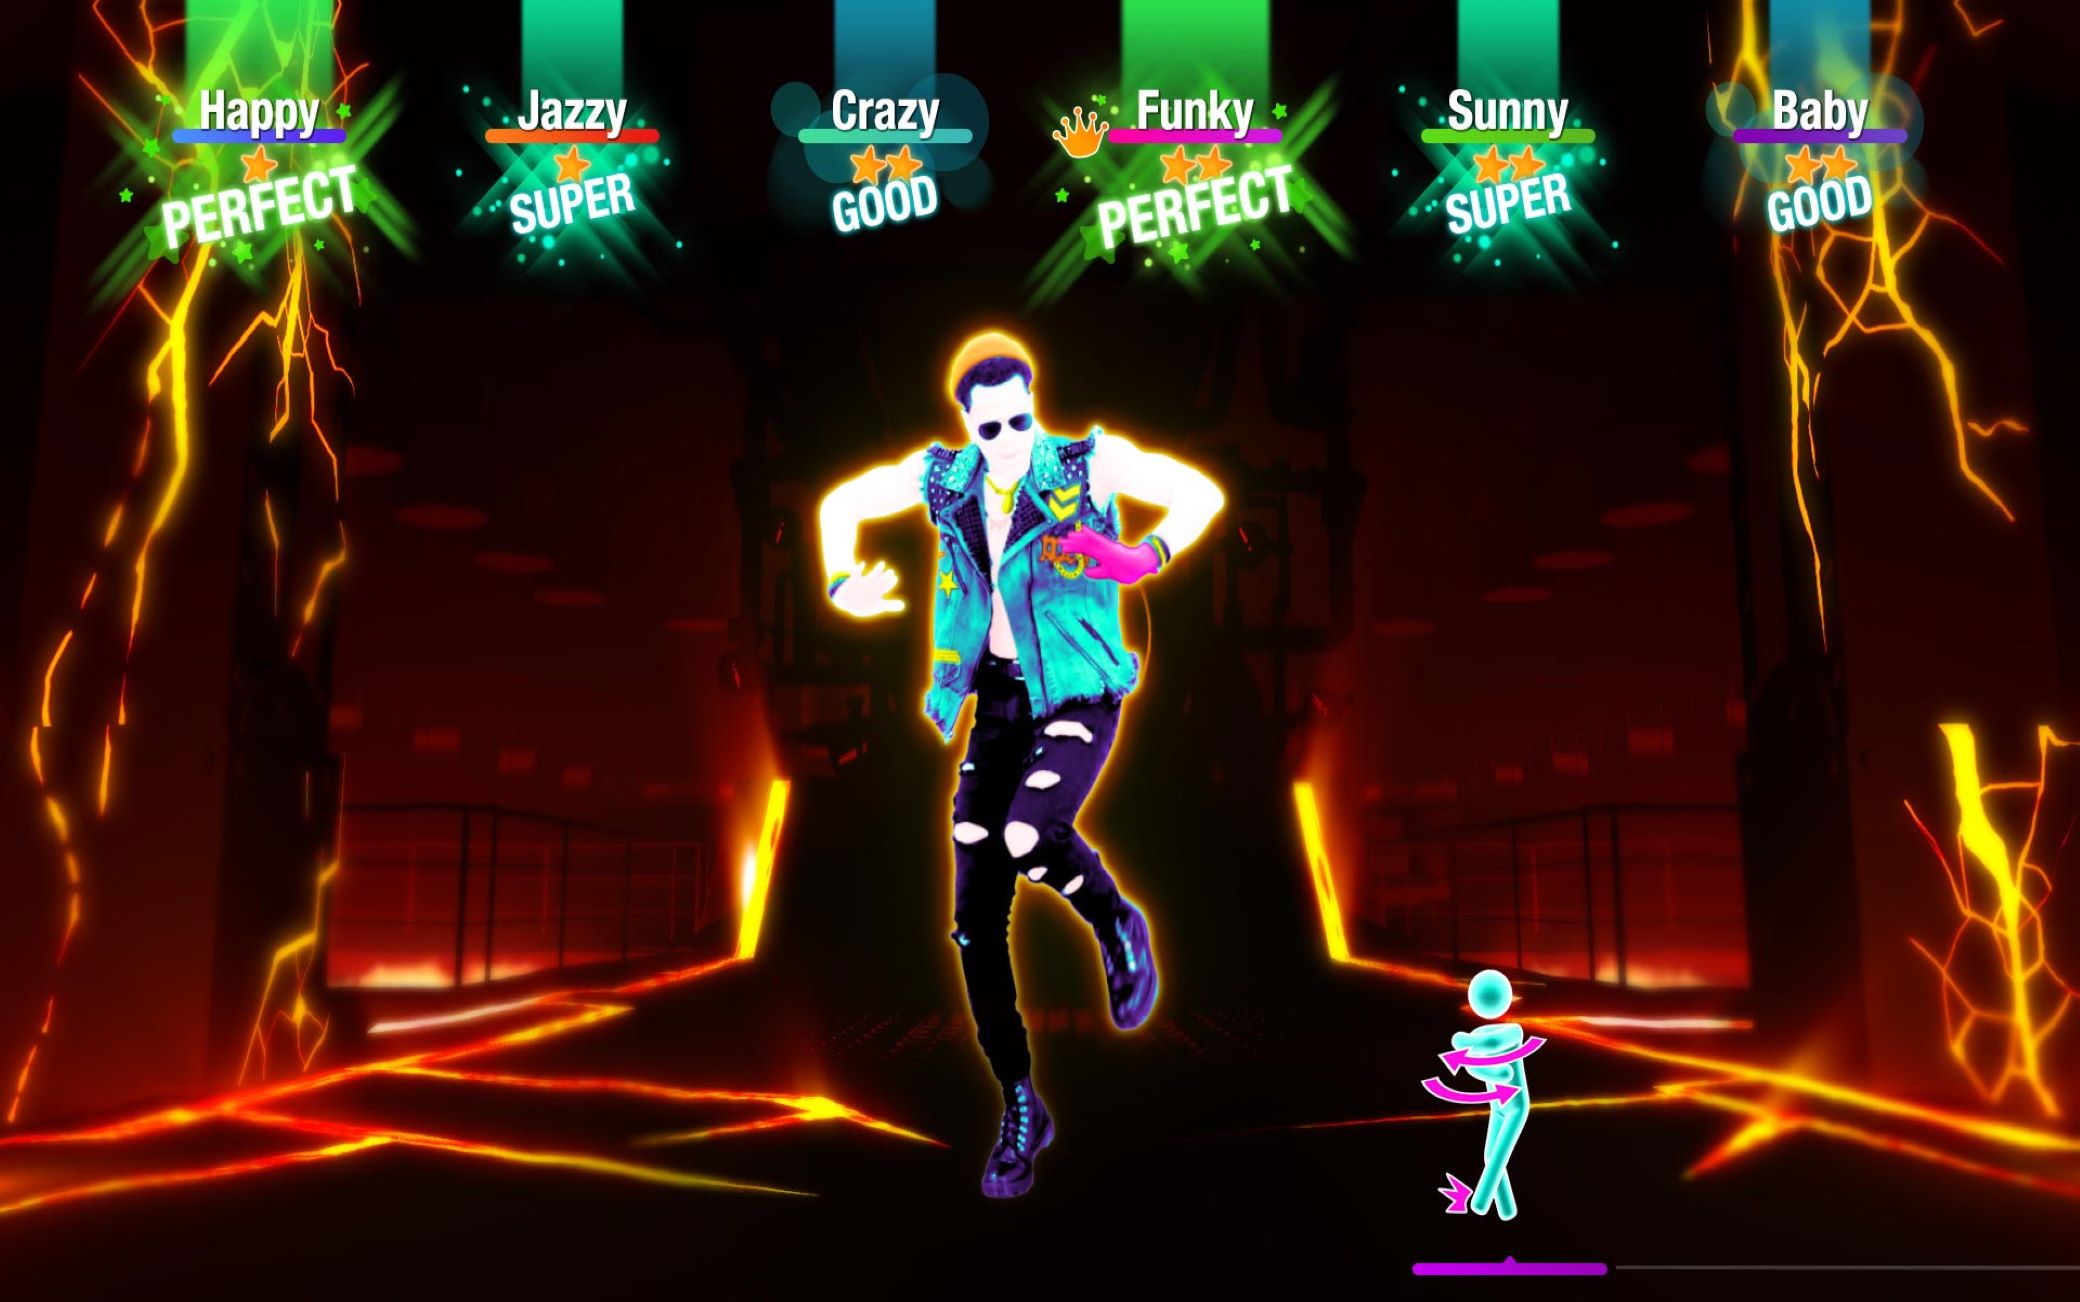 just dance 2021 somgs